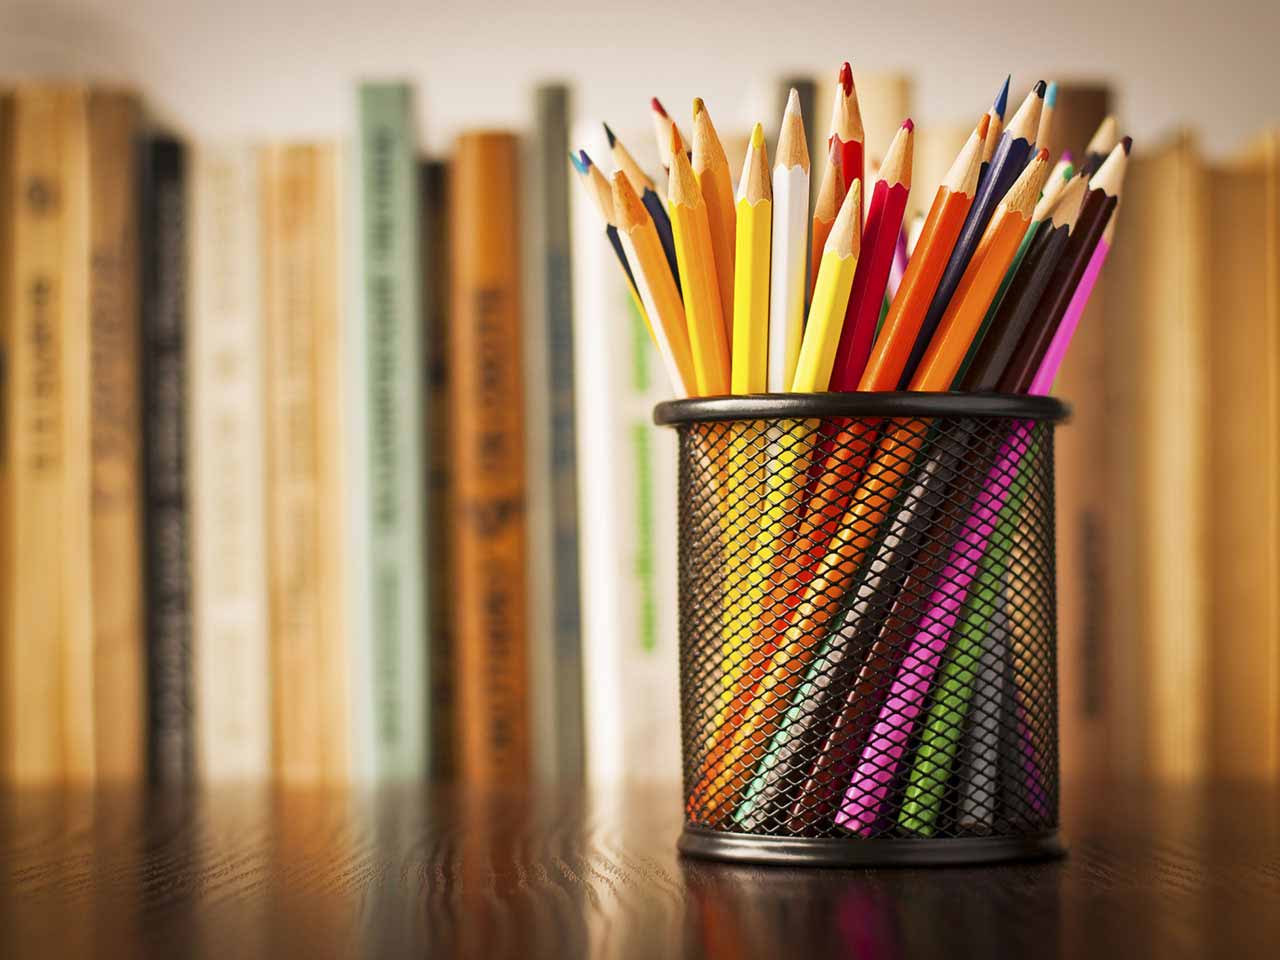 Pencil pot tidy and books on desk